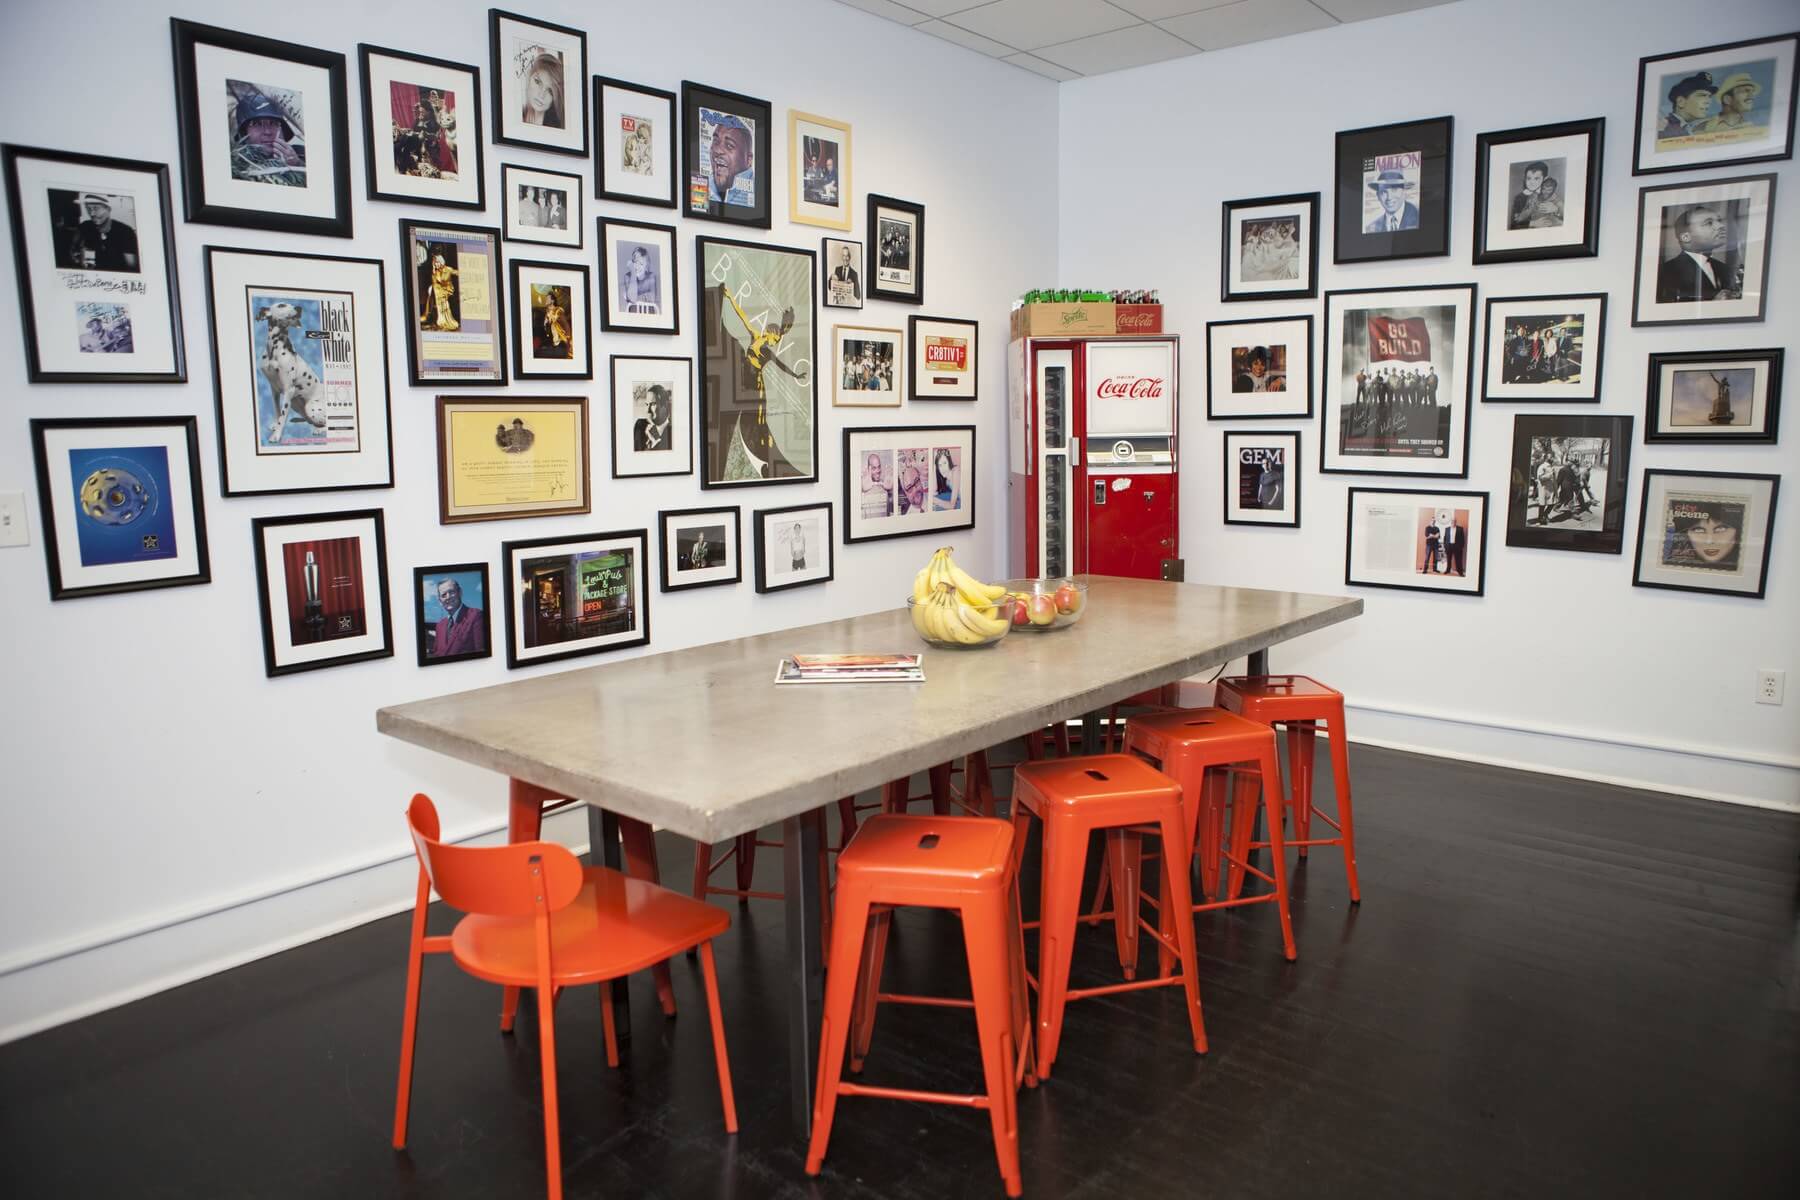 Pops of color ad art and vintage items soften the sleek black-and-white foundation